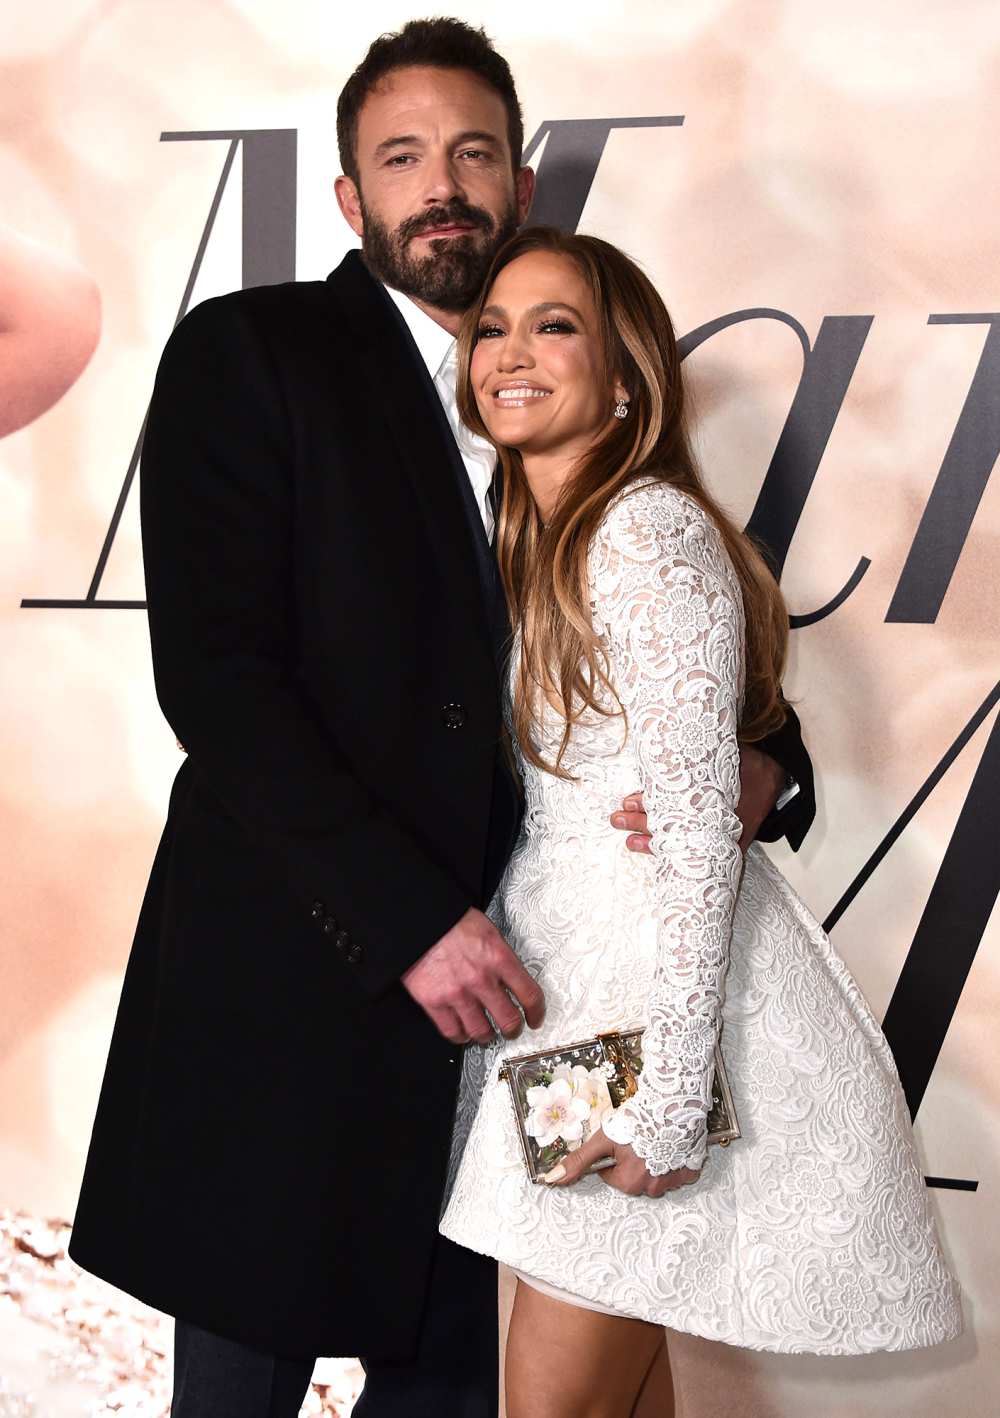 Ben Affleck Directs GF Jennifer Lopez in 'Marry Me' Music Video: 'Early Valentine's Present'